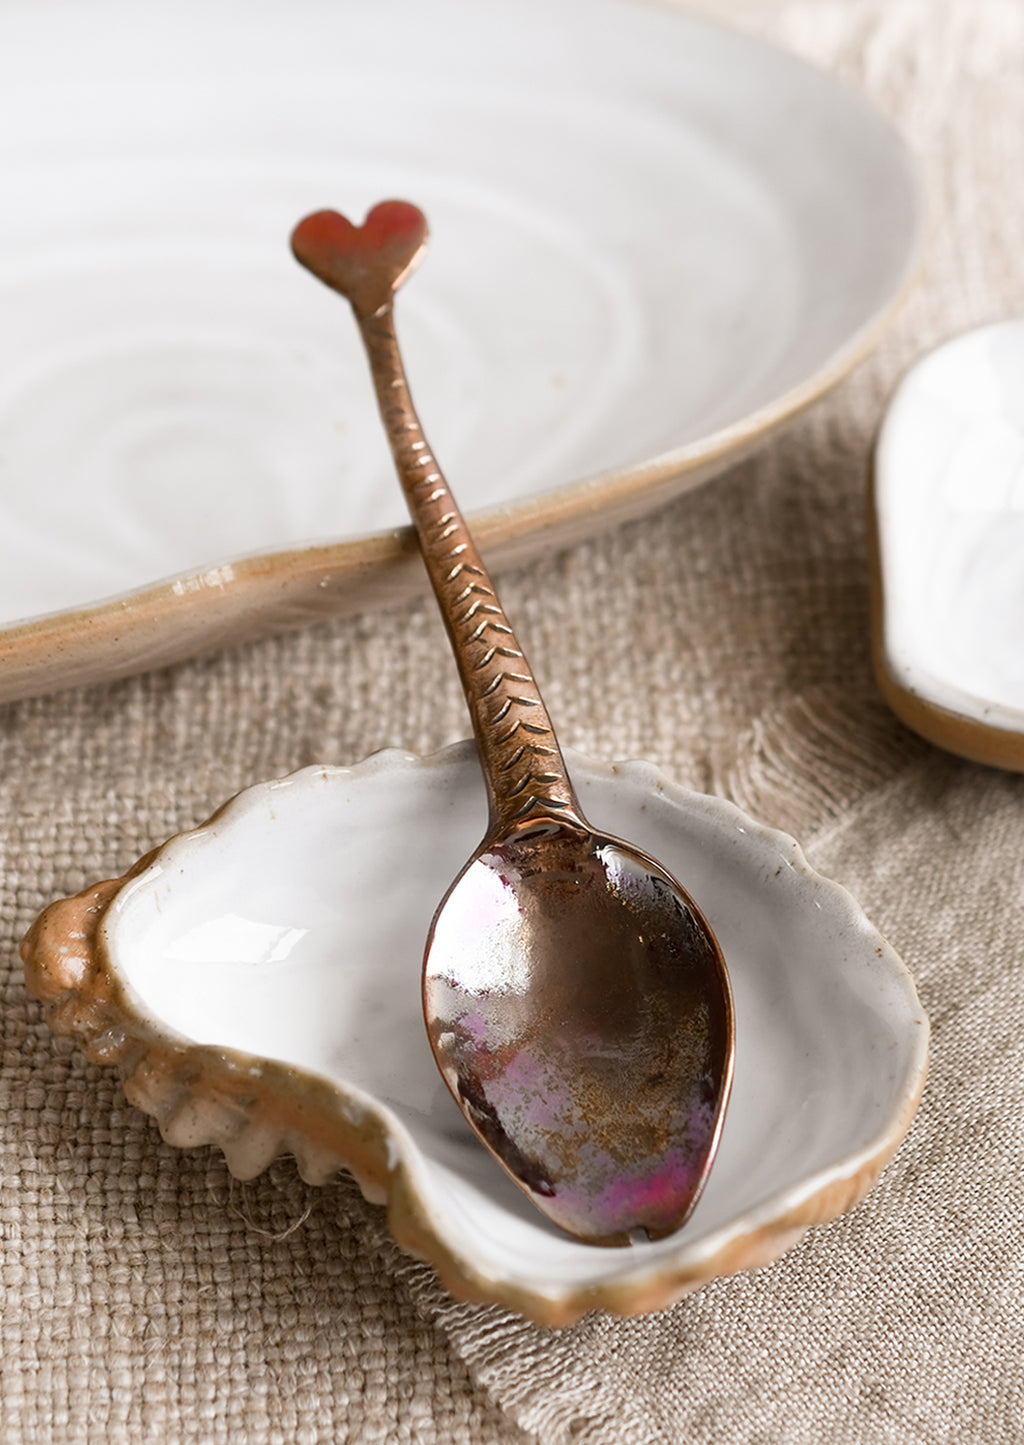 Spoon: A copper spoon with fish-tail handle.